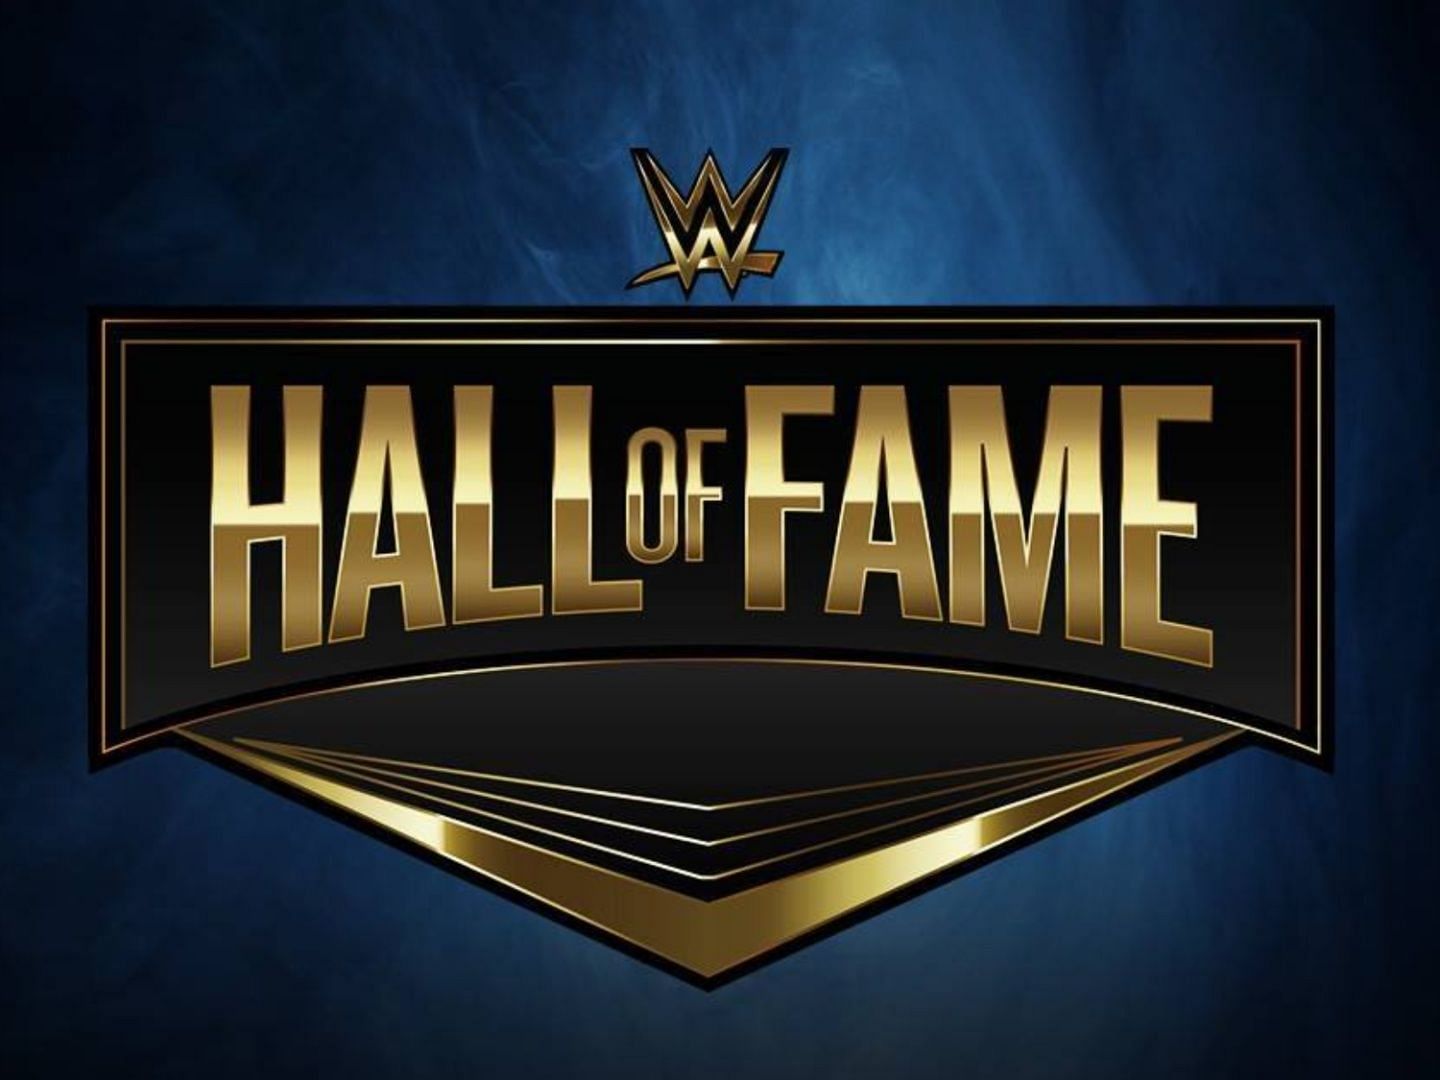 WWE has been using this Hall of Fame logo since 2019.